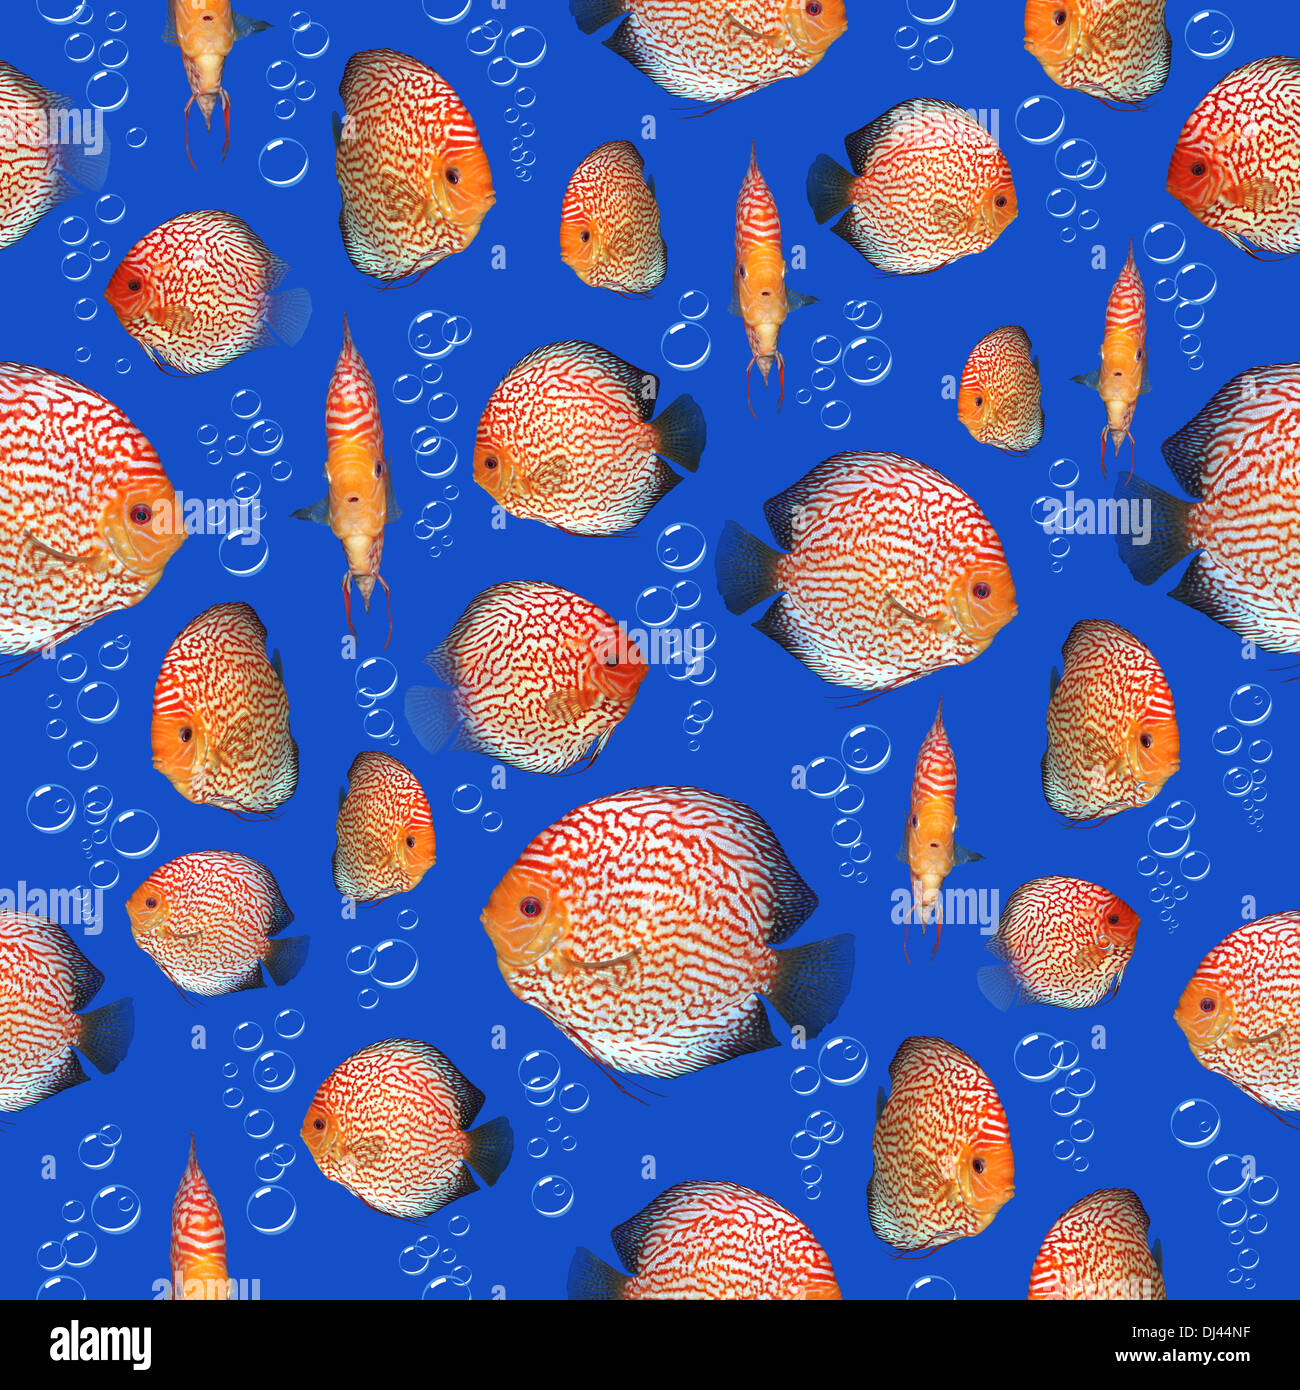 Checkerboard Discus fish in aquarium as a seamless background Stock Photo